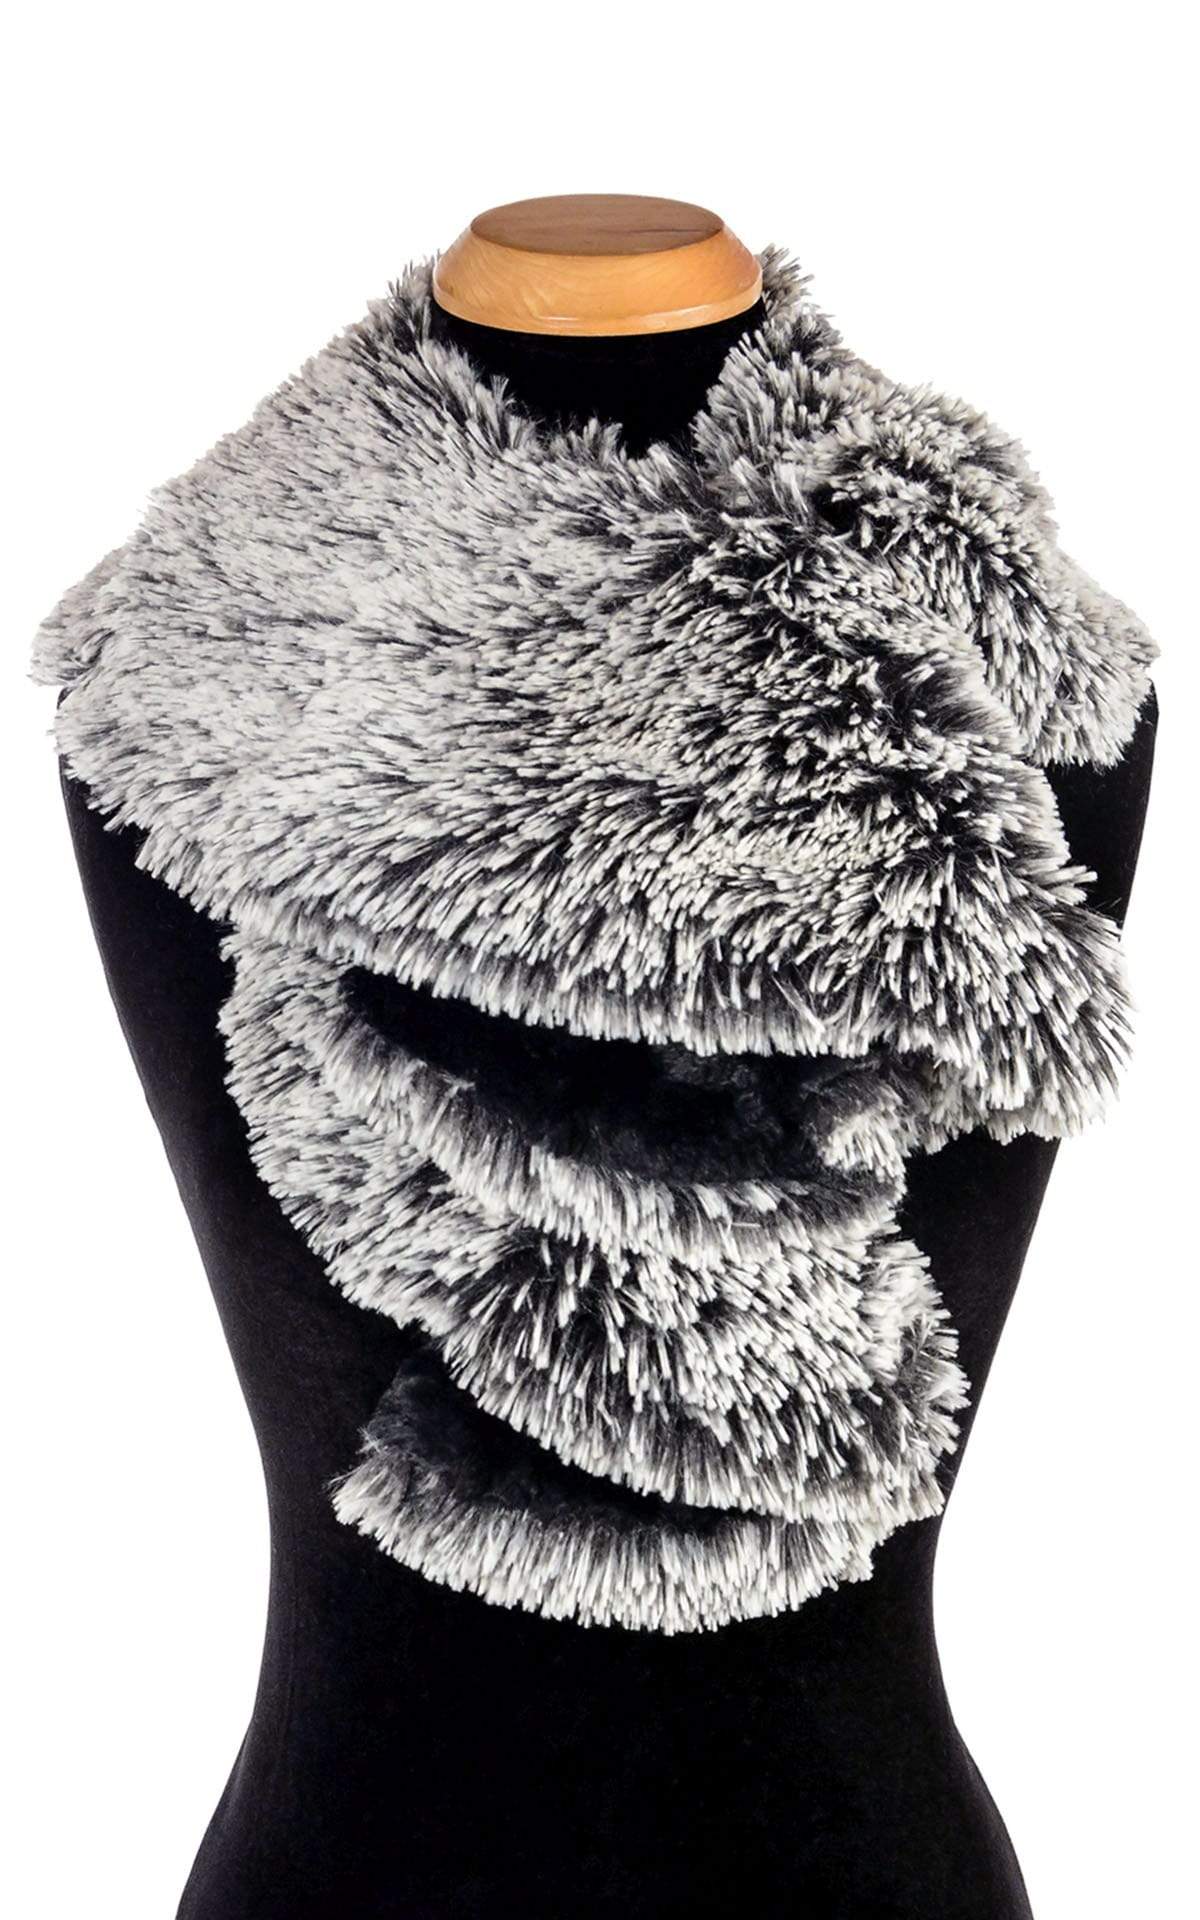 Styled Cascade Scarf | Silver Tipped Fox and Black Cuddly Faux Fur | Handmade Seattle WA USA by Pandemonium Millinery